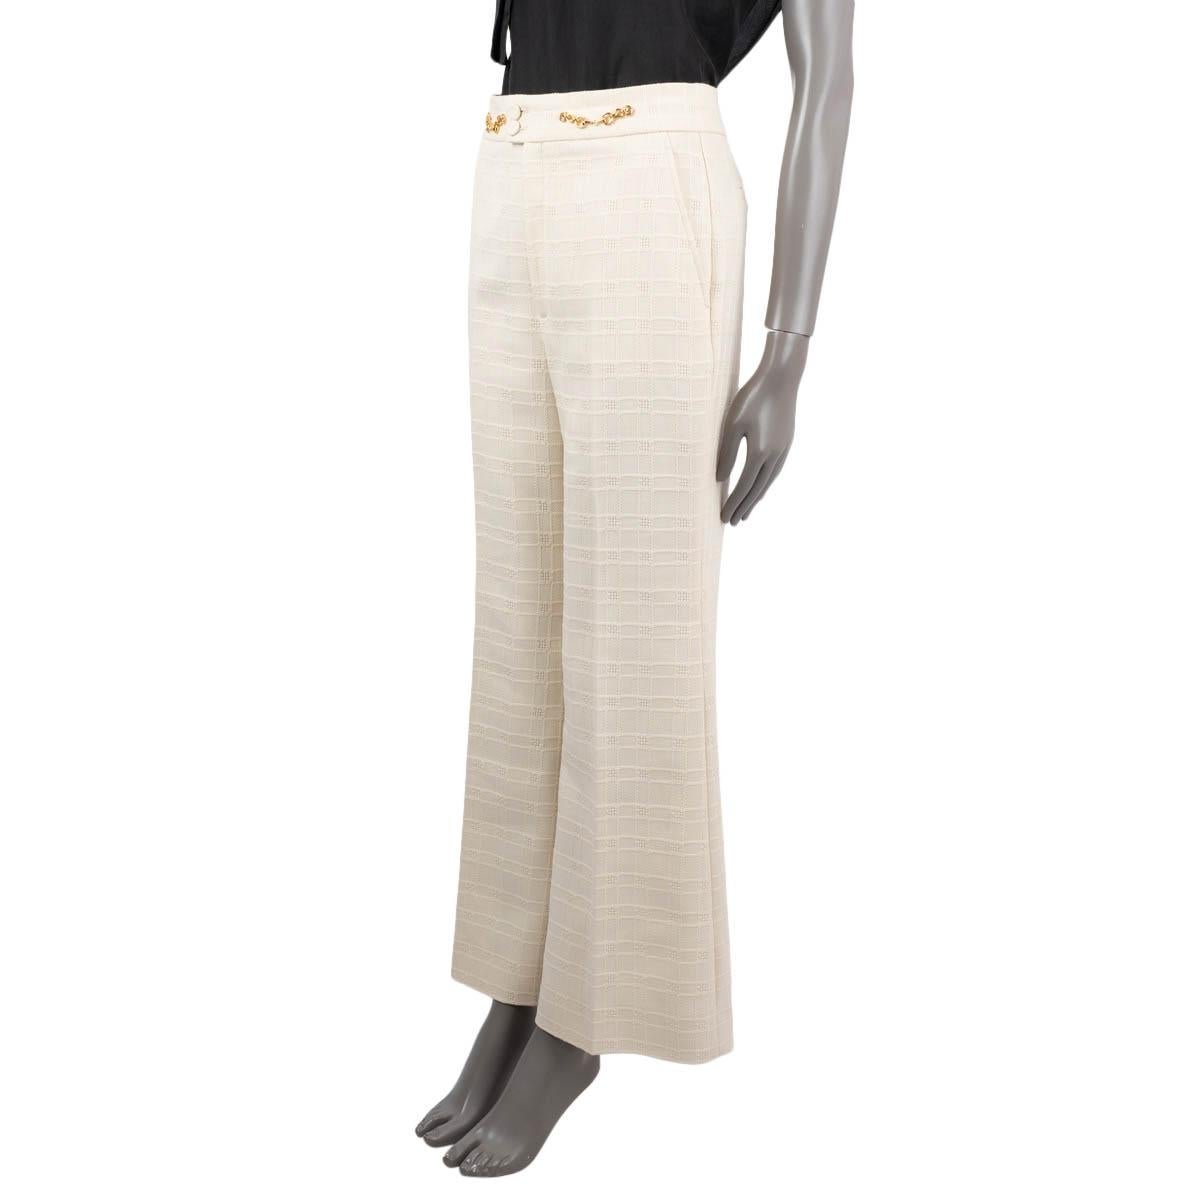 100% authentic Gucci flared tweed pants in ivory cotton (61%) and wool (39%) with gold-tone horsebit details at the waist. Features a hight waist, two slit pockets on the front and two welt pockets on the back. Open with buttons and a zipper on the